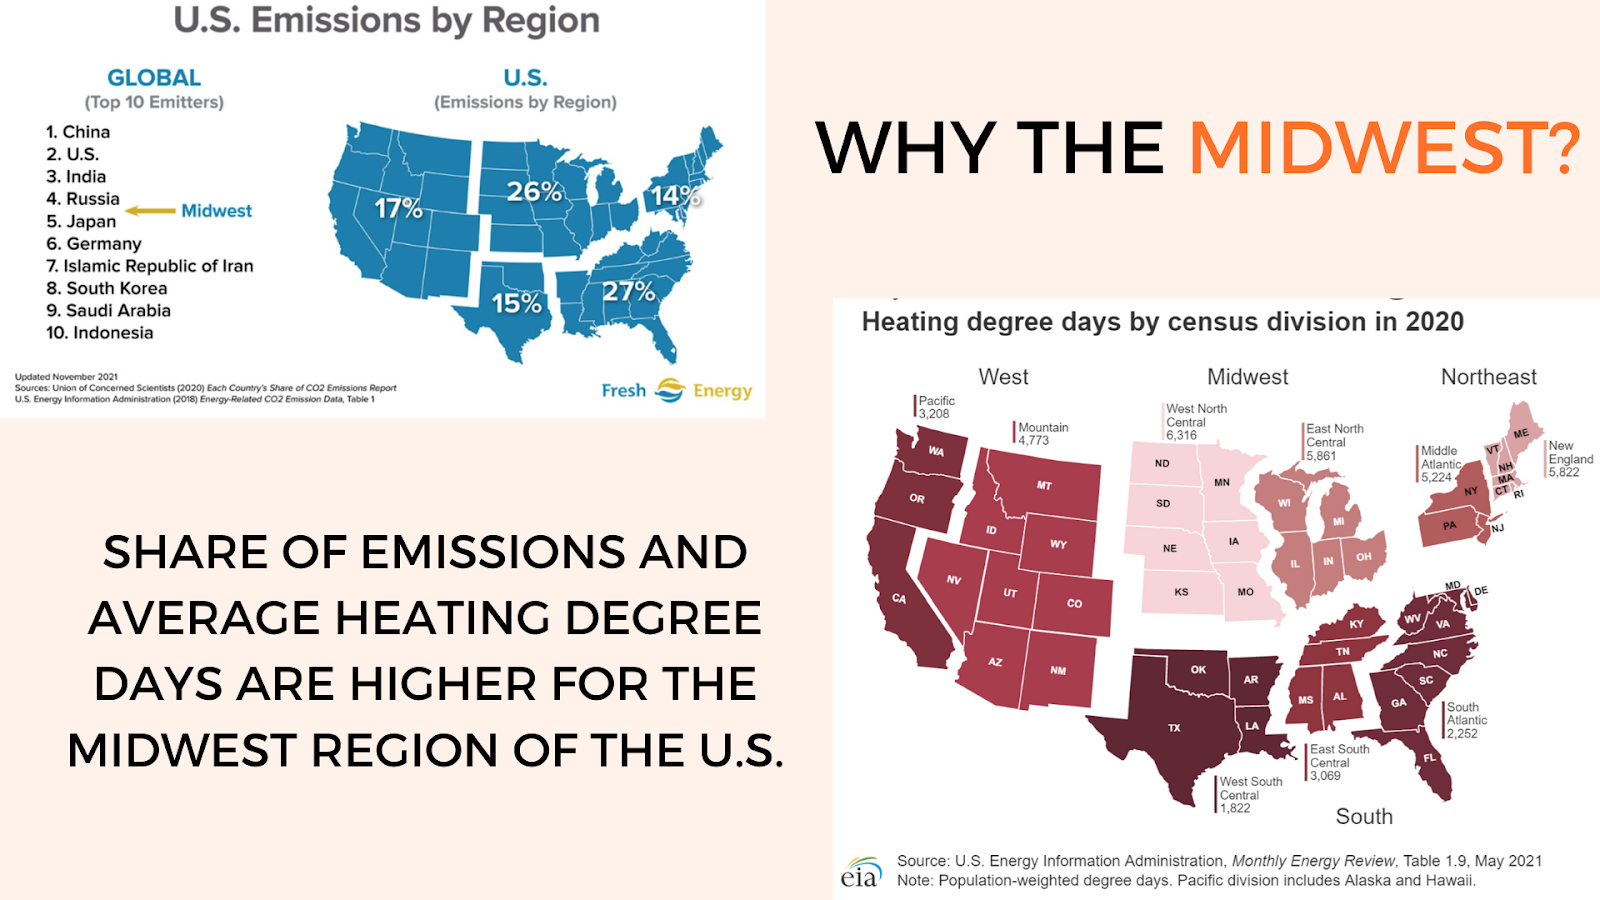 Charts showing 35-40% of U.S. CO2 emissions can be attributed to residential or commercial buildings; most of the 2050 buildings are already built/under construction. All current projects will play into future climate targets. 